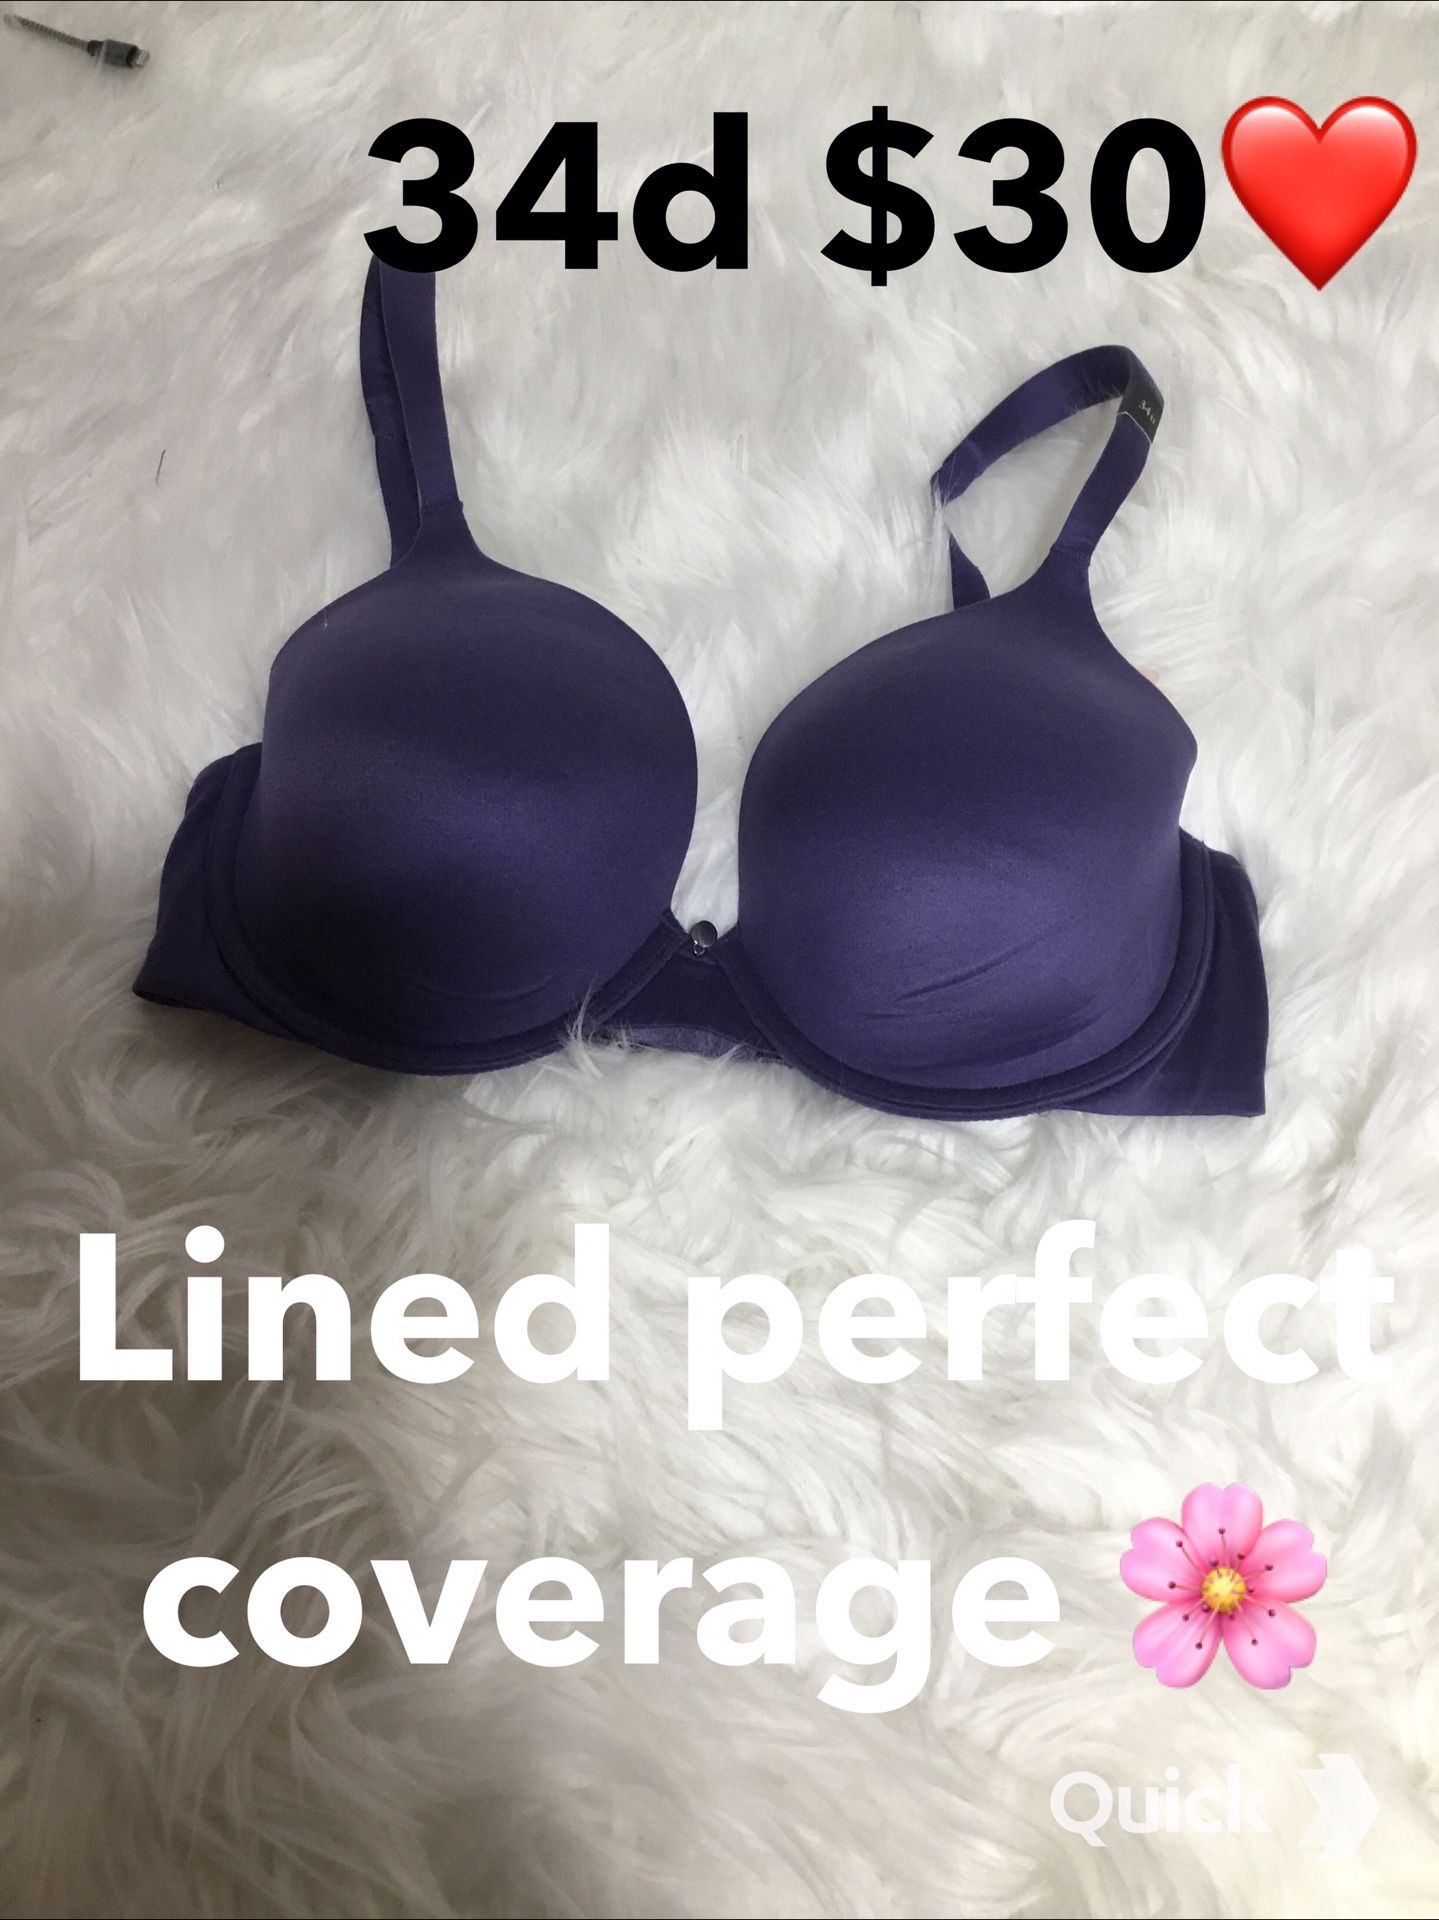 New Bra Victoria Secret Size 34d Lined Perfect Coverage firm Price No  Deliver for Sale in Los Angeles, CA - OfferUp